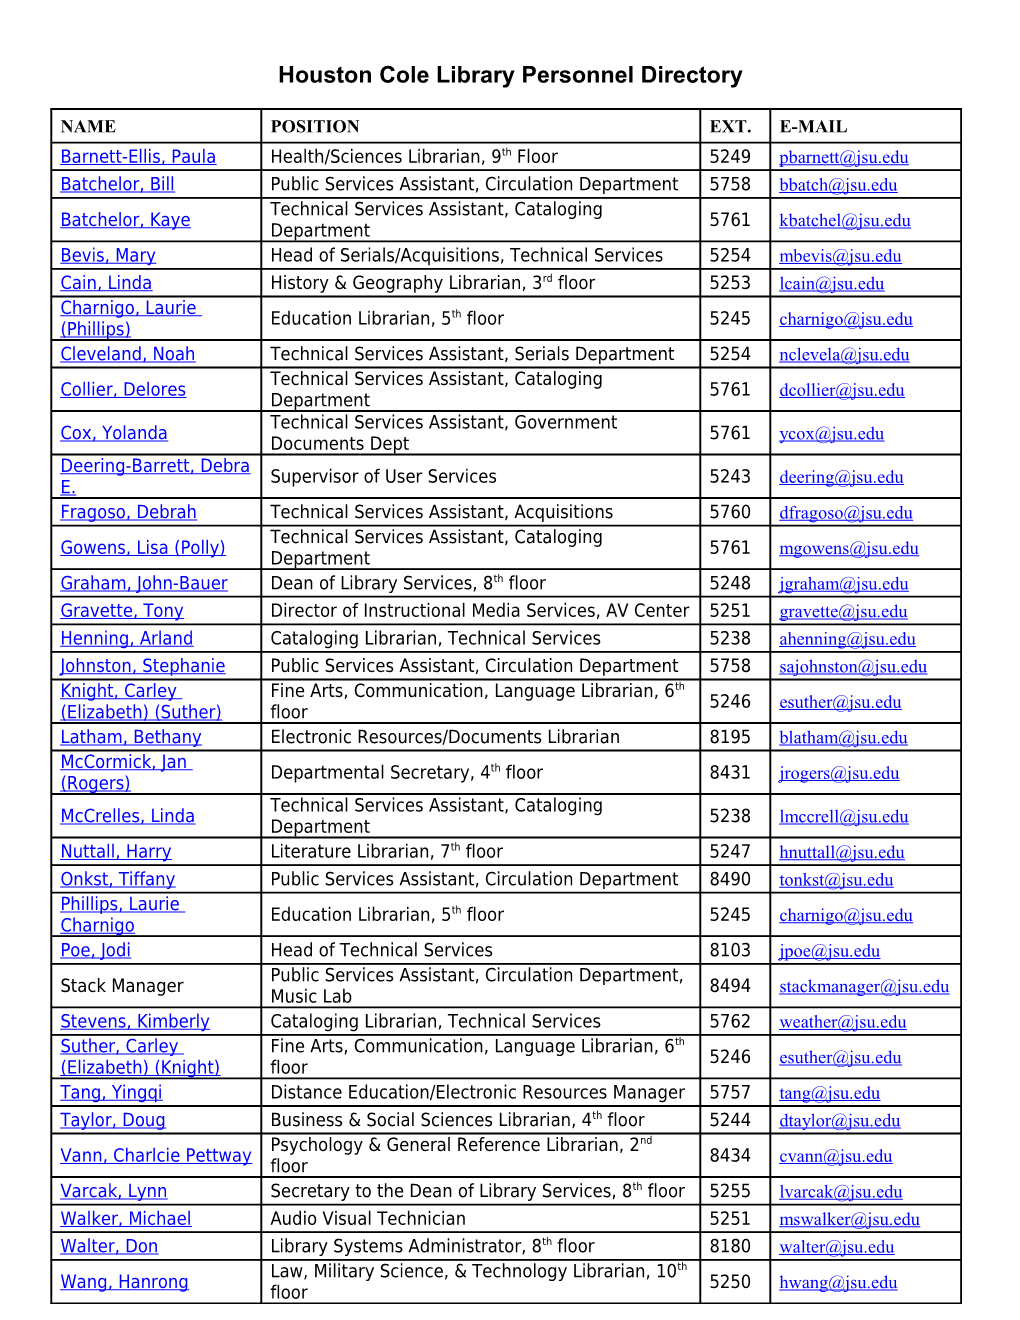 Houston Cole Library Personnel Directory